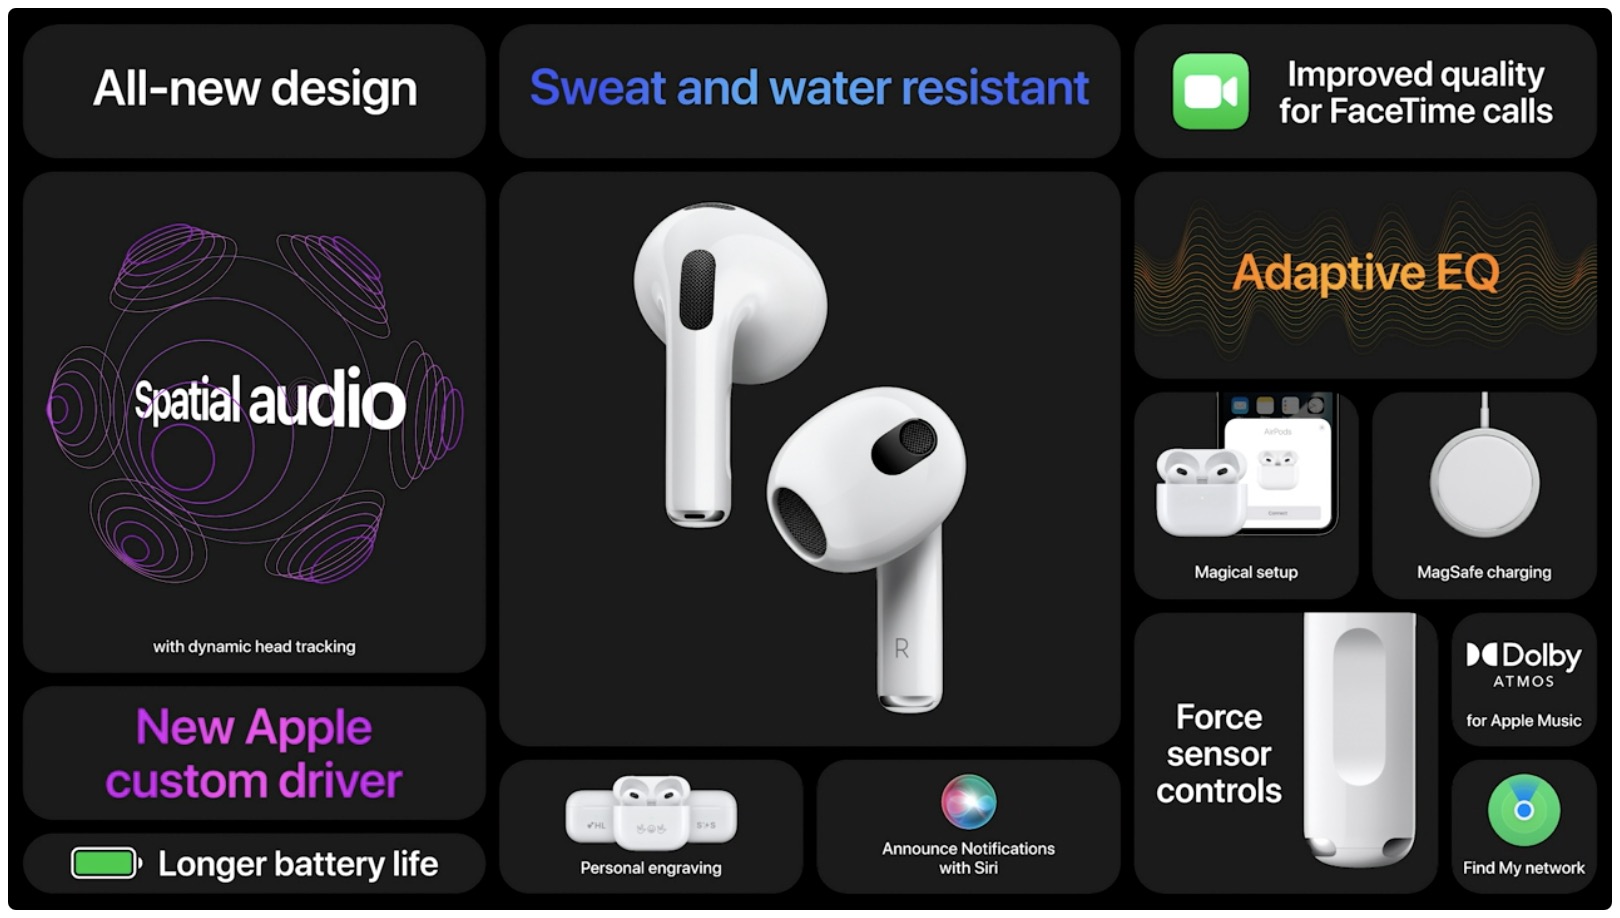 Apple's marketing image highlighting the key new features of AirPods 3